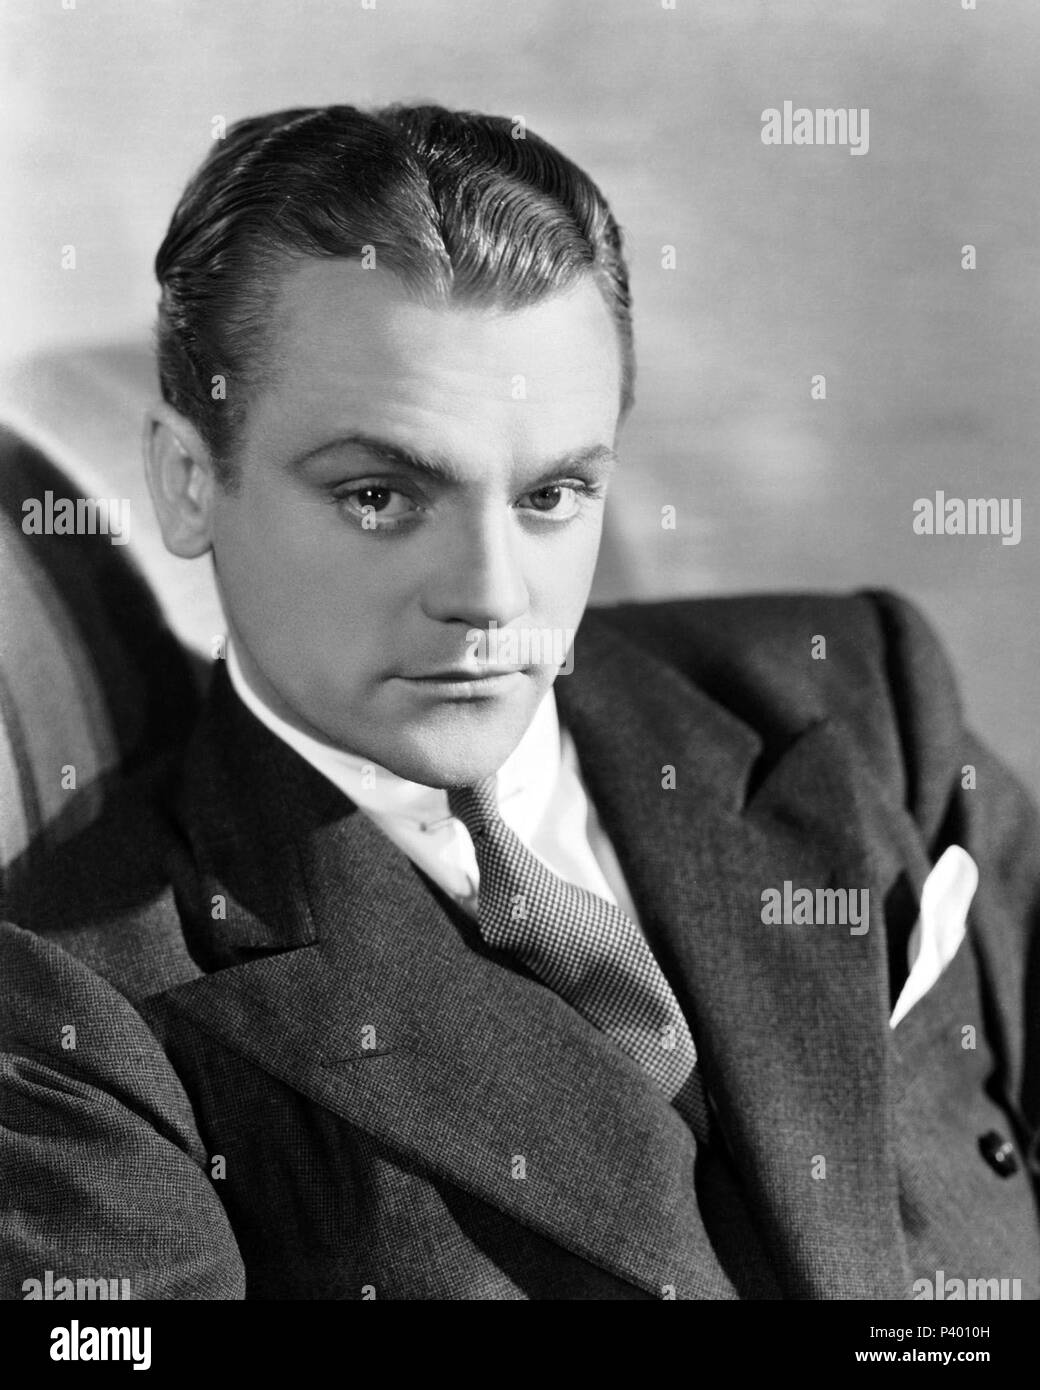 6 Sizes! New Photo Hollywood Silver Screen Legend & Movie Star James Cagney 